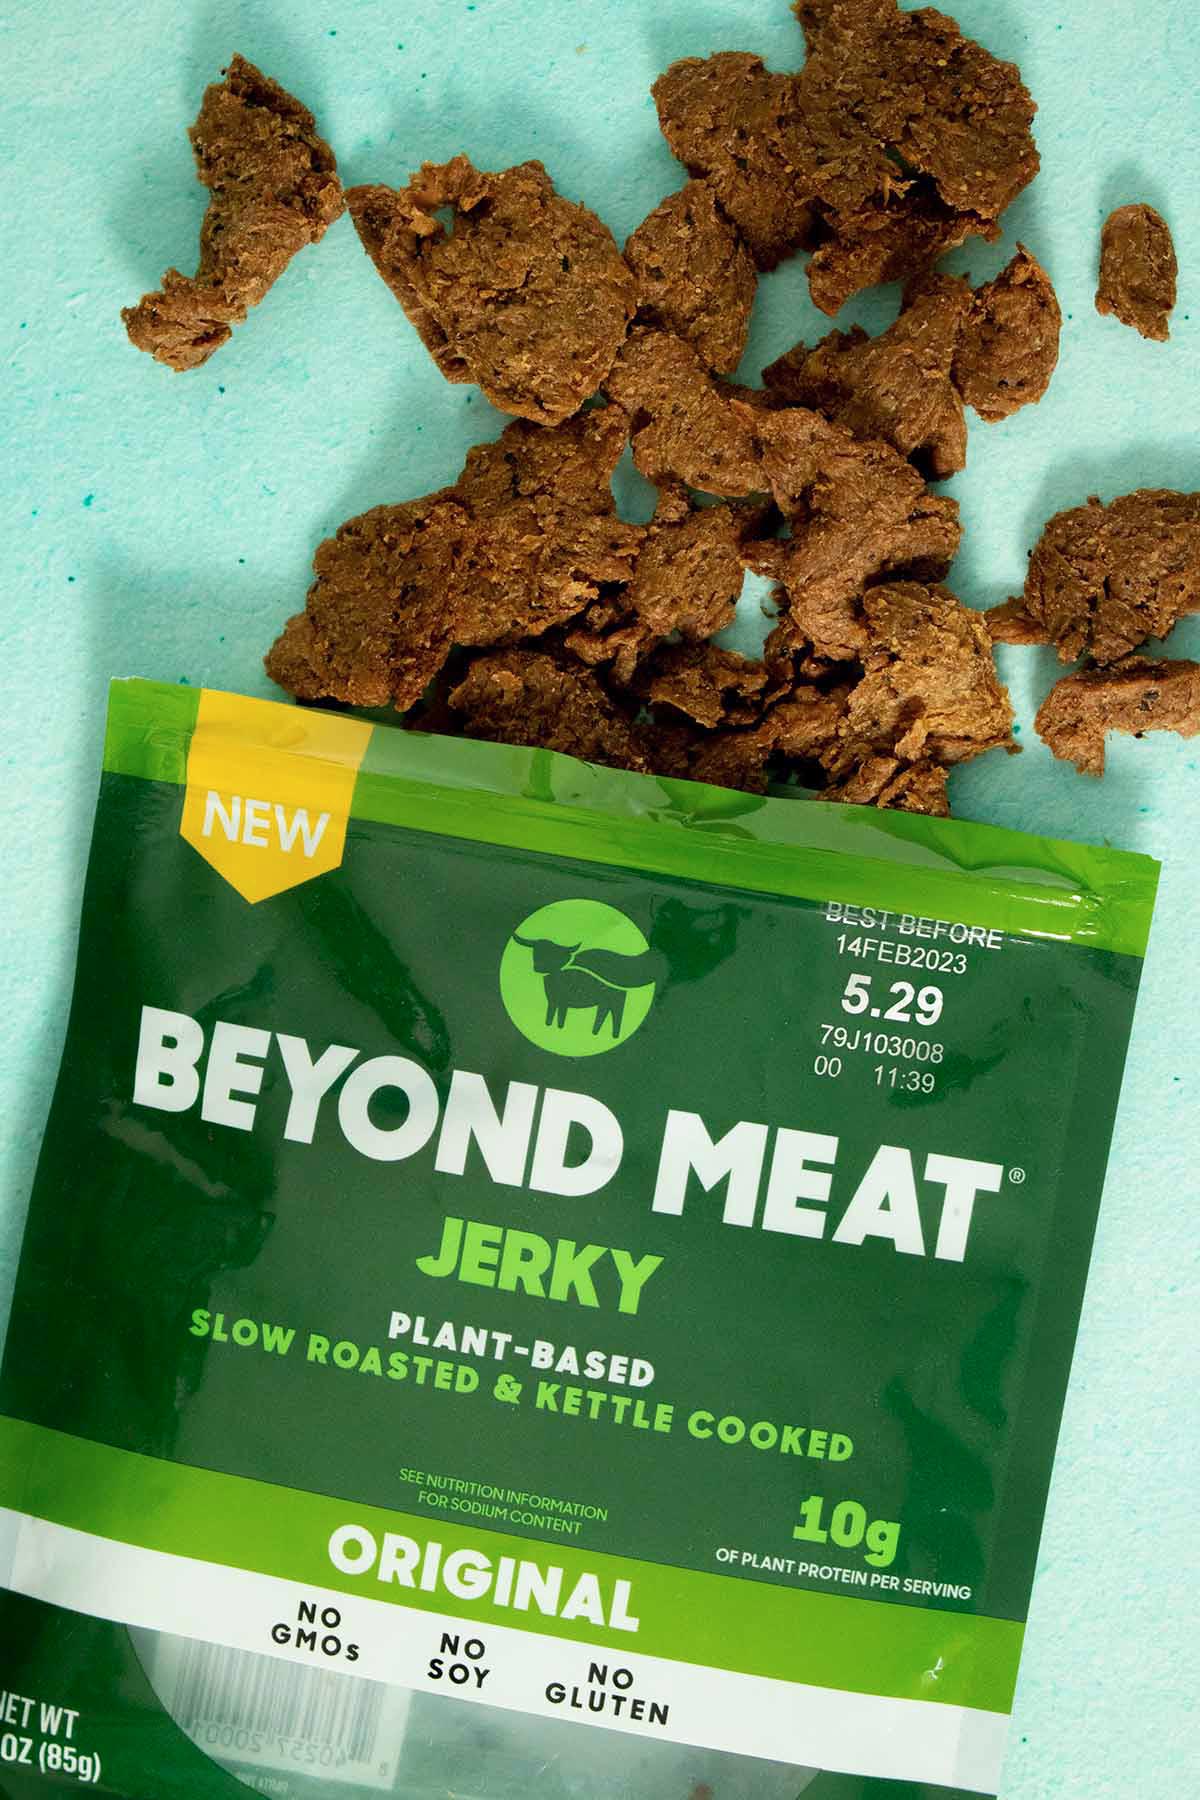 bag of Beyond Meat jerky, original flavor, with jerky spilling out of the top